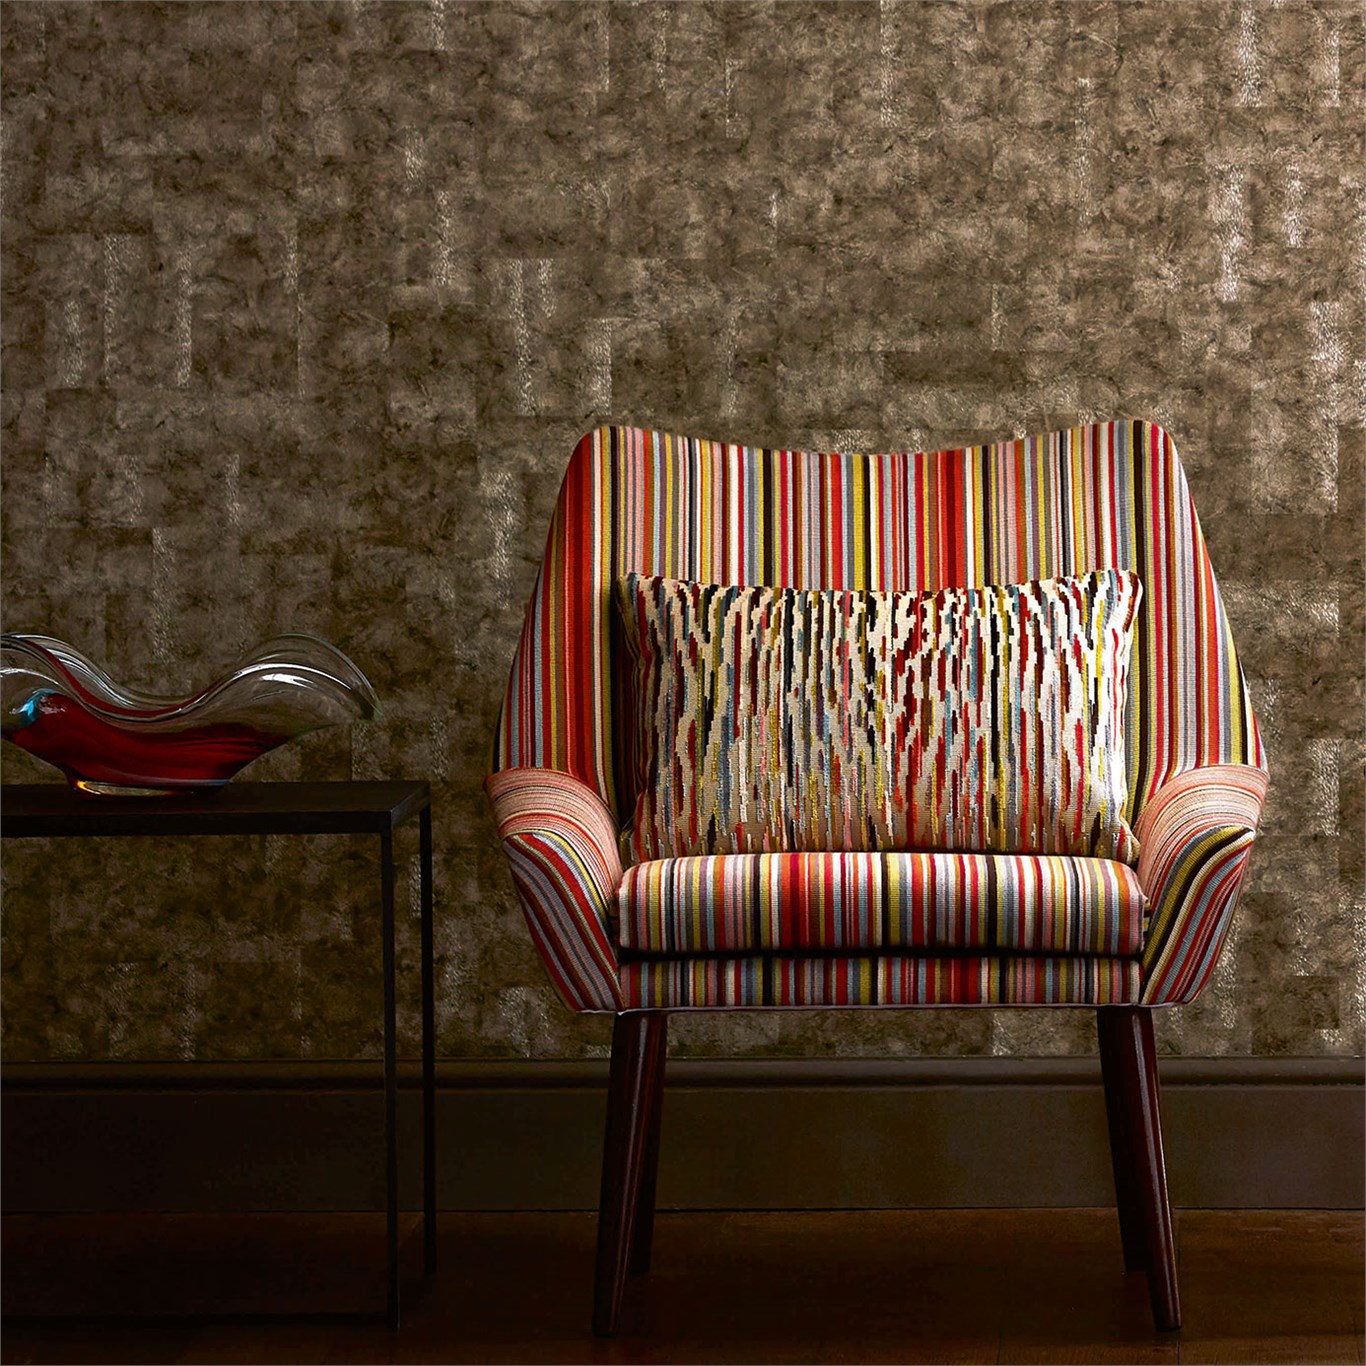 Products | Harlequin - Designer Fabrics and Wallpapers | Zuri ...